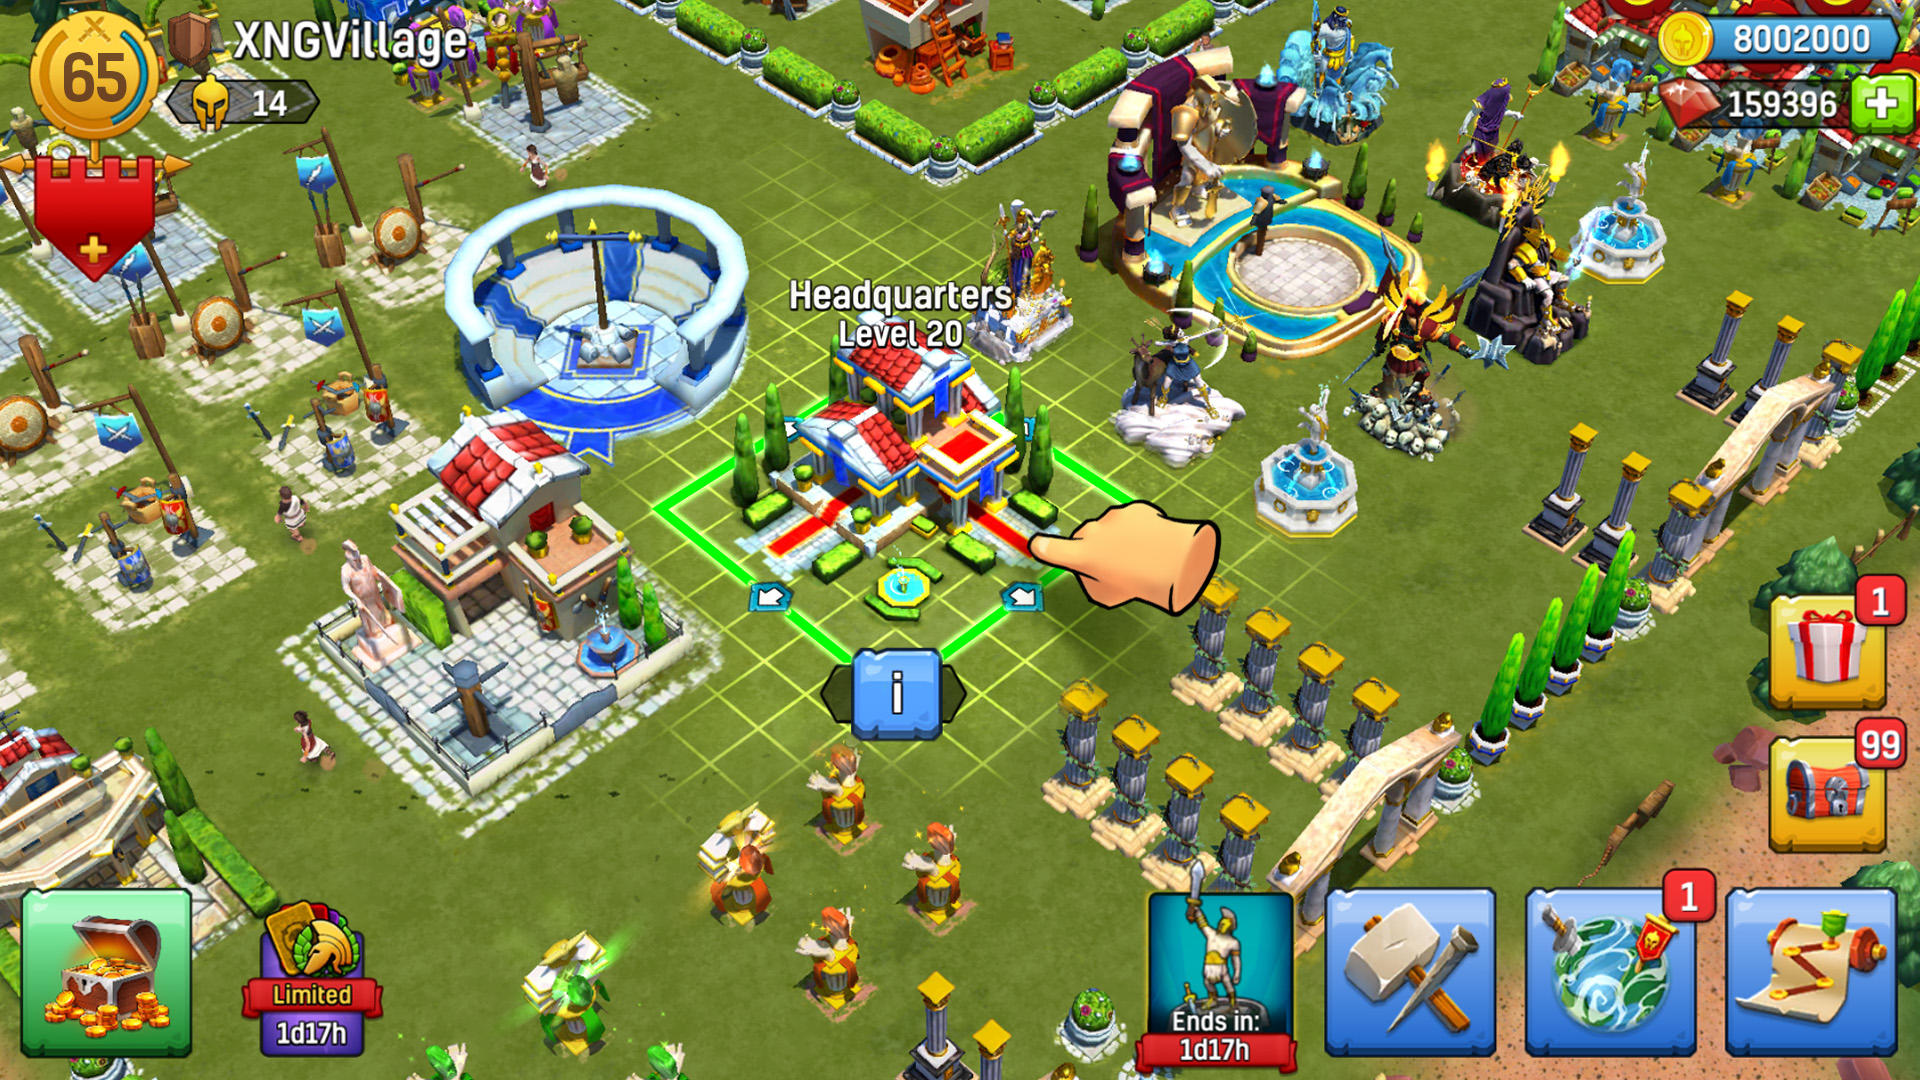 Gladiator Heroes Clash Kingdom android iOS apk download for free-TapTap